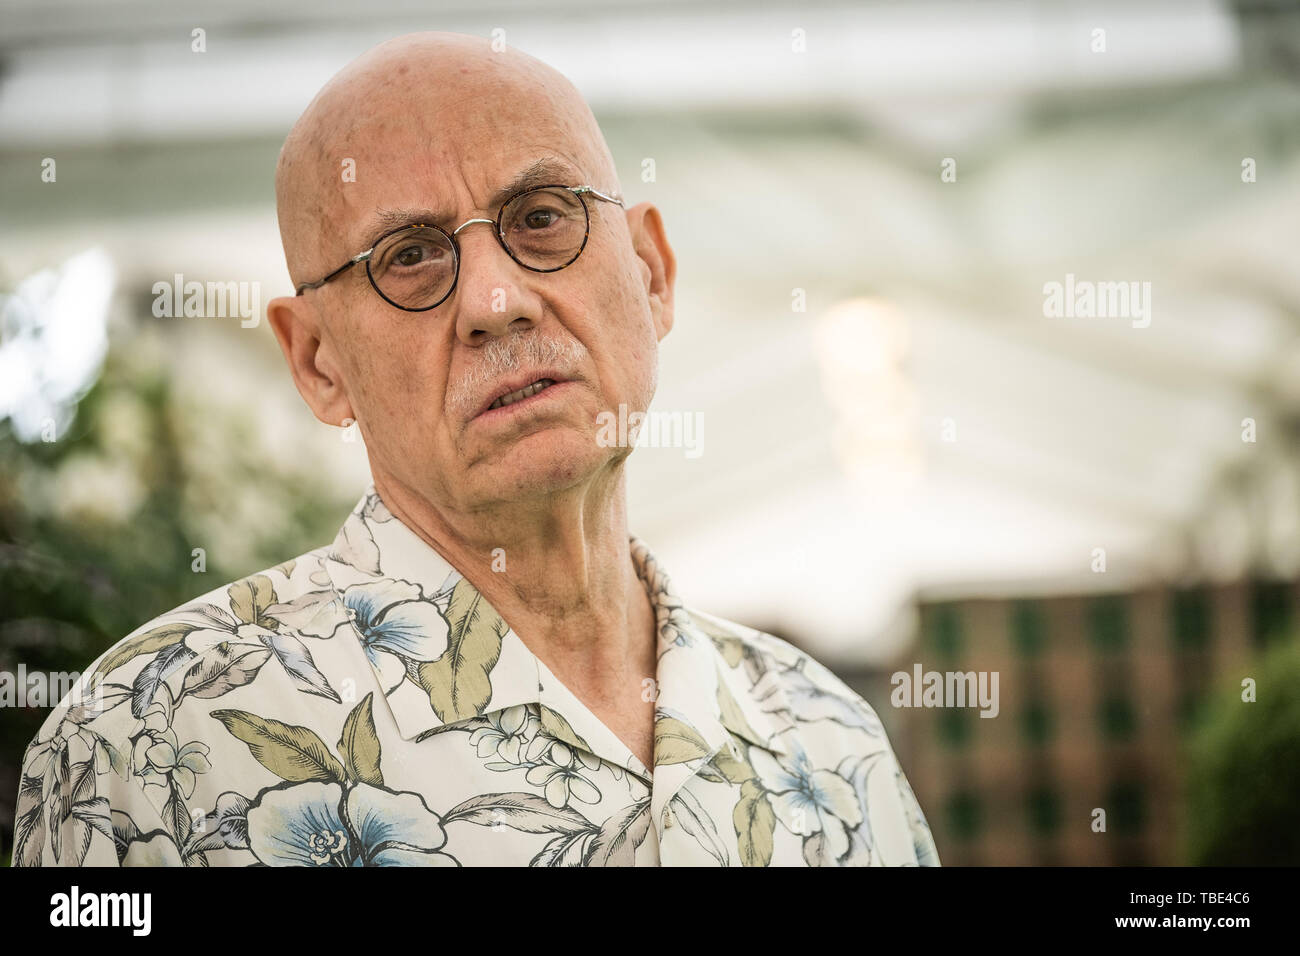 The Hay Festival, Hay on Wye, Wales UK , Saturday 01 June  2019.  Lee Earle 'James' Ellroy , iconic American crime fiction writer and essayist.  Renowned fo his prose stye that  uses only short, staccato sentences.   Appearing at the 2019 Hay Festival.  The festival, now in its 32nd year, held annually in the small town of Hay on Wye on the Wales - England border,  attracts the finest writers, politicians and intellectuals from  across the globe for 10 days of talks and discussions, celebrating the best of the written word and critical debate  Photo © Keith Morris / Alamy Live News Stock Photo